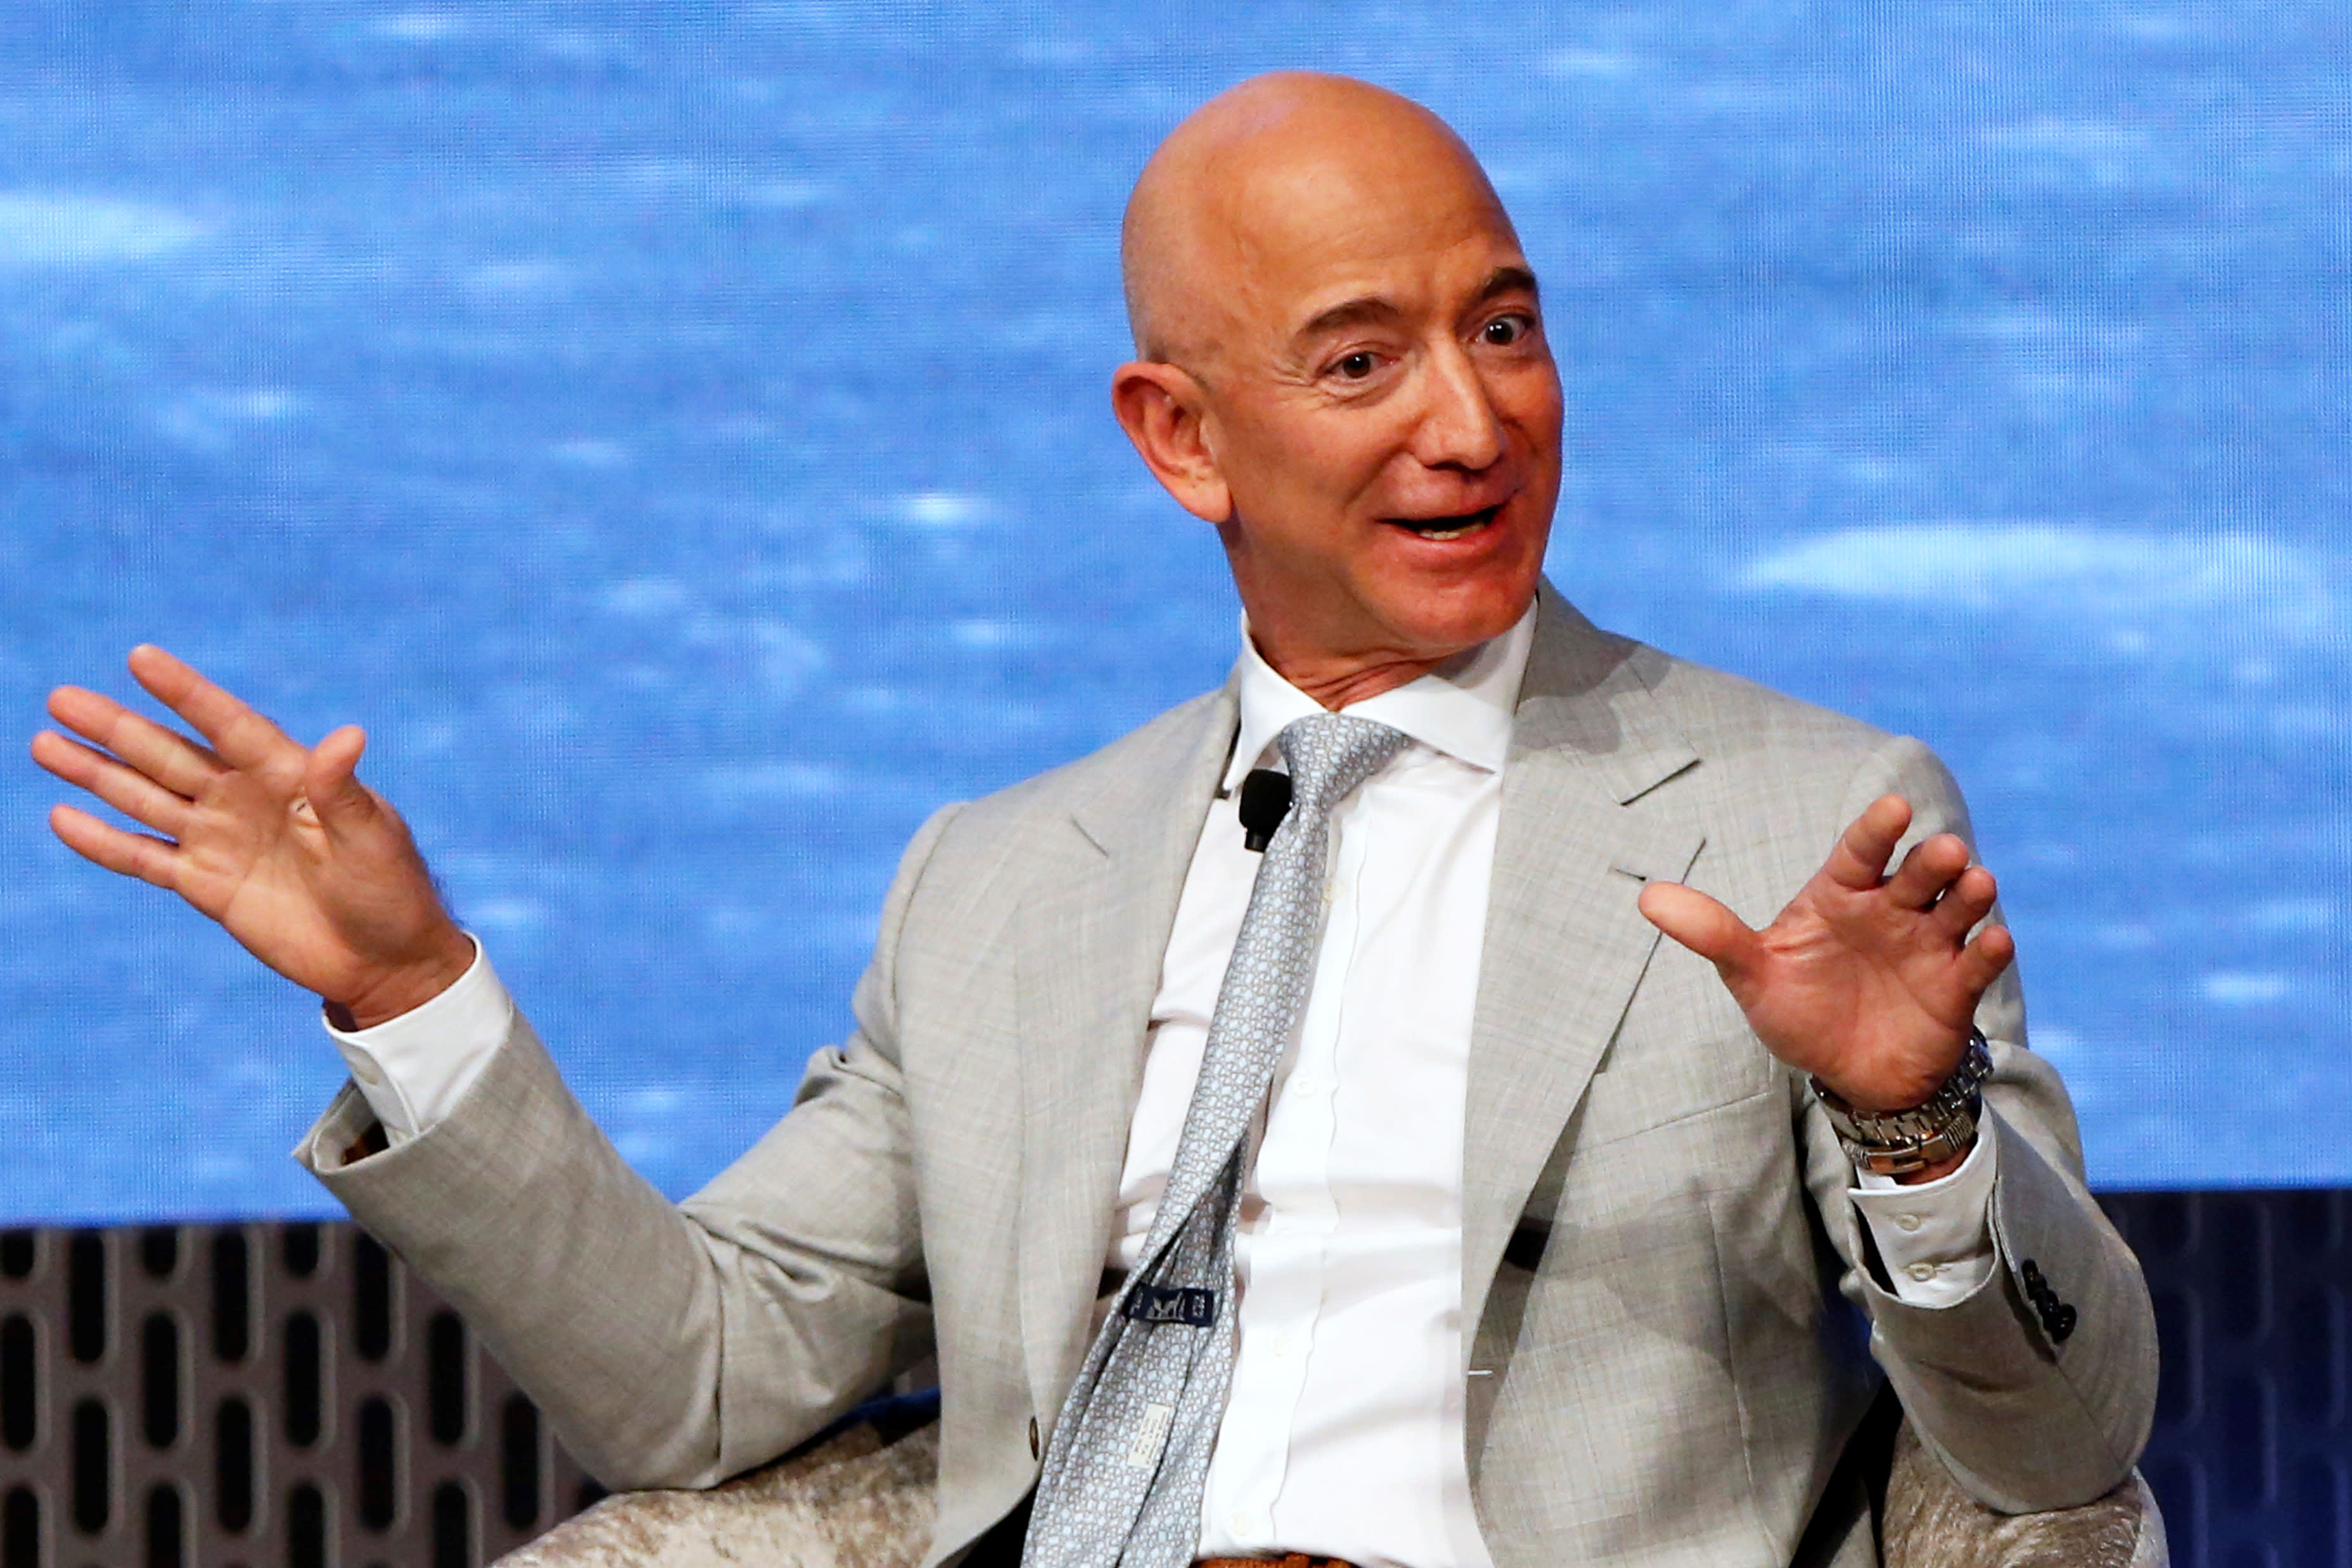 Amazon wants to be the exclusive Thursday NFL broadcaster in 2023